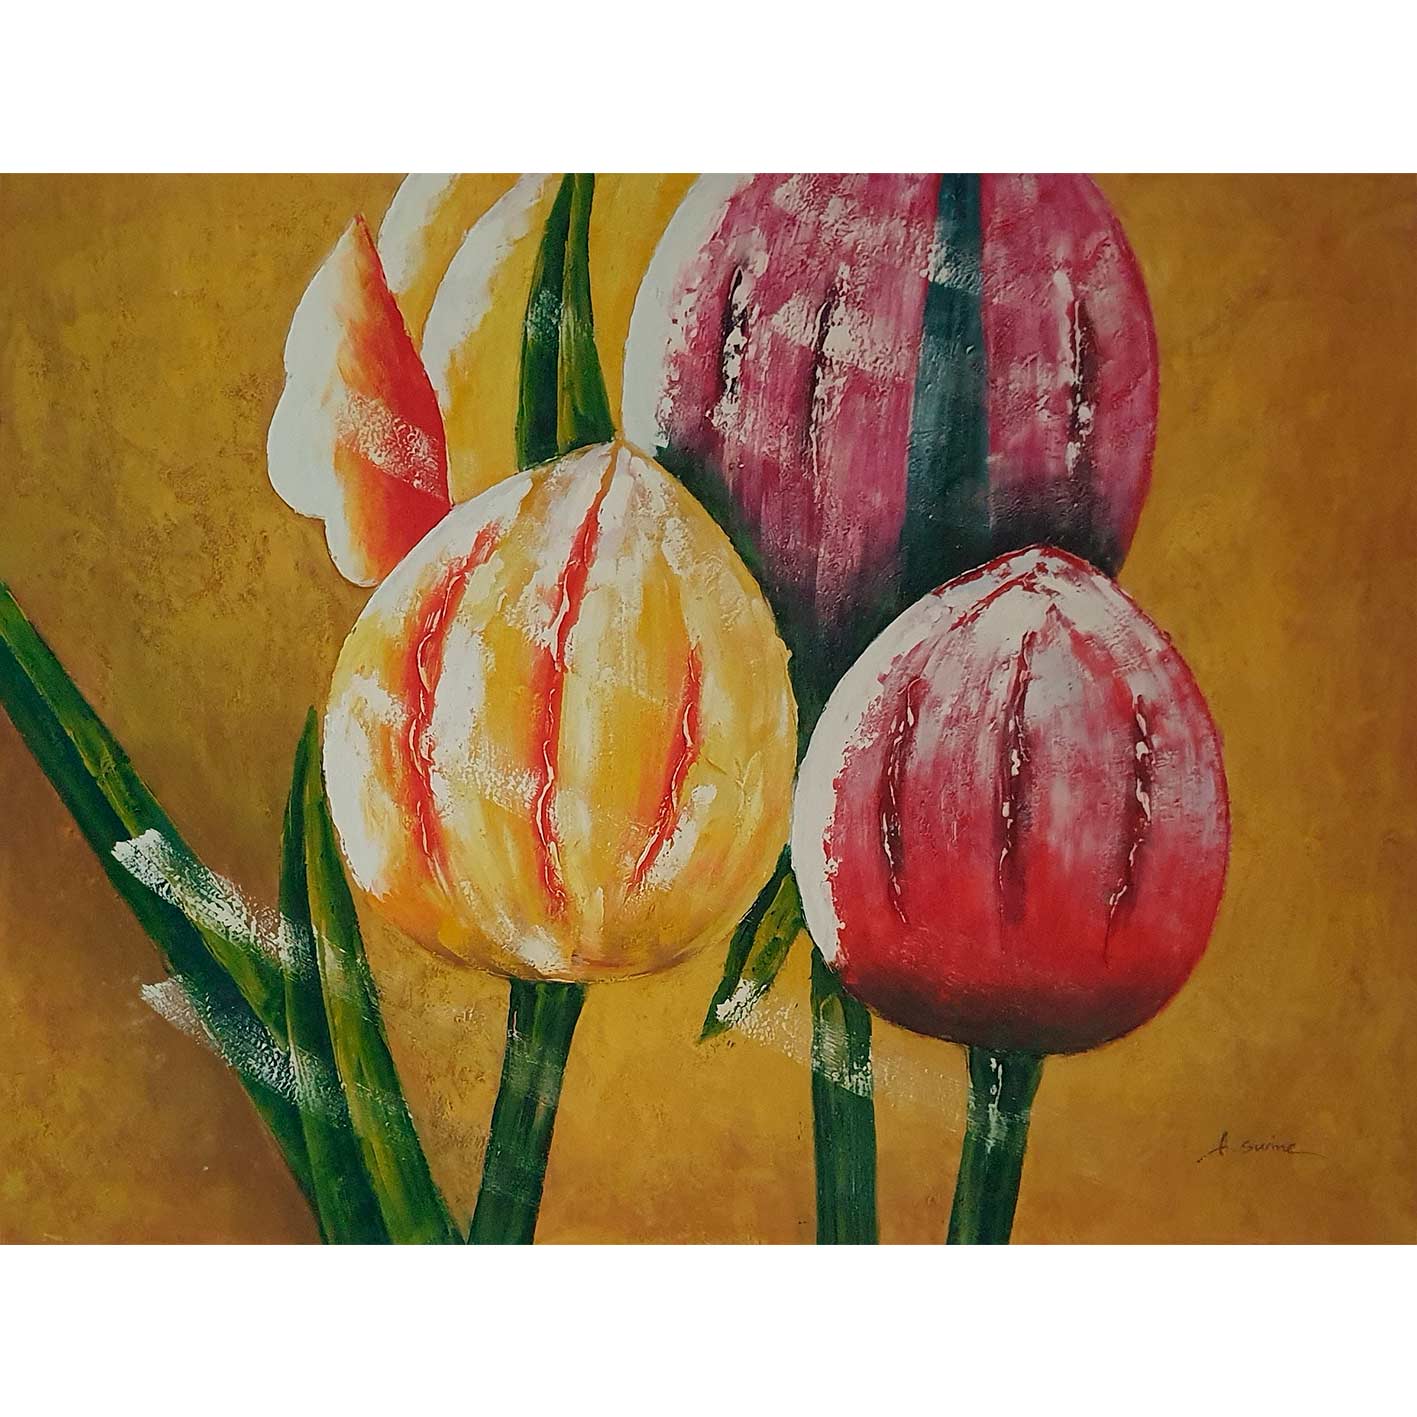 Large Tulips Diptych Painting 120x90 cm [2 pieces]